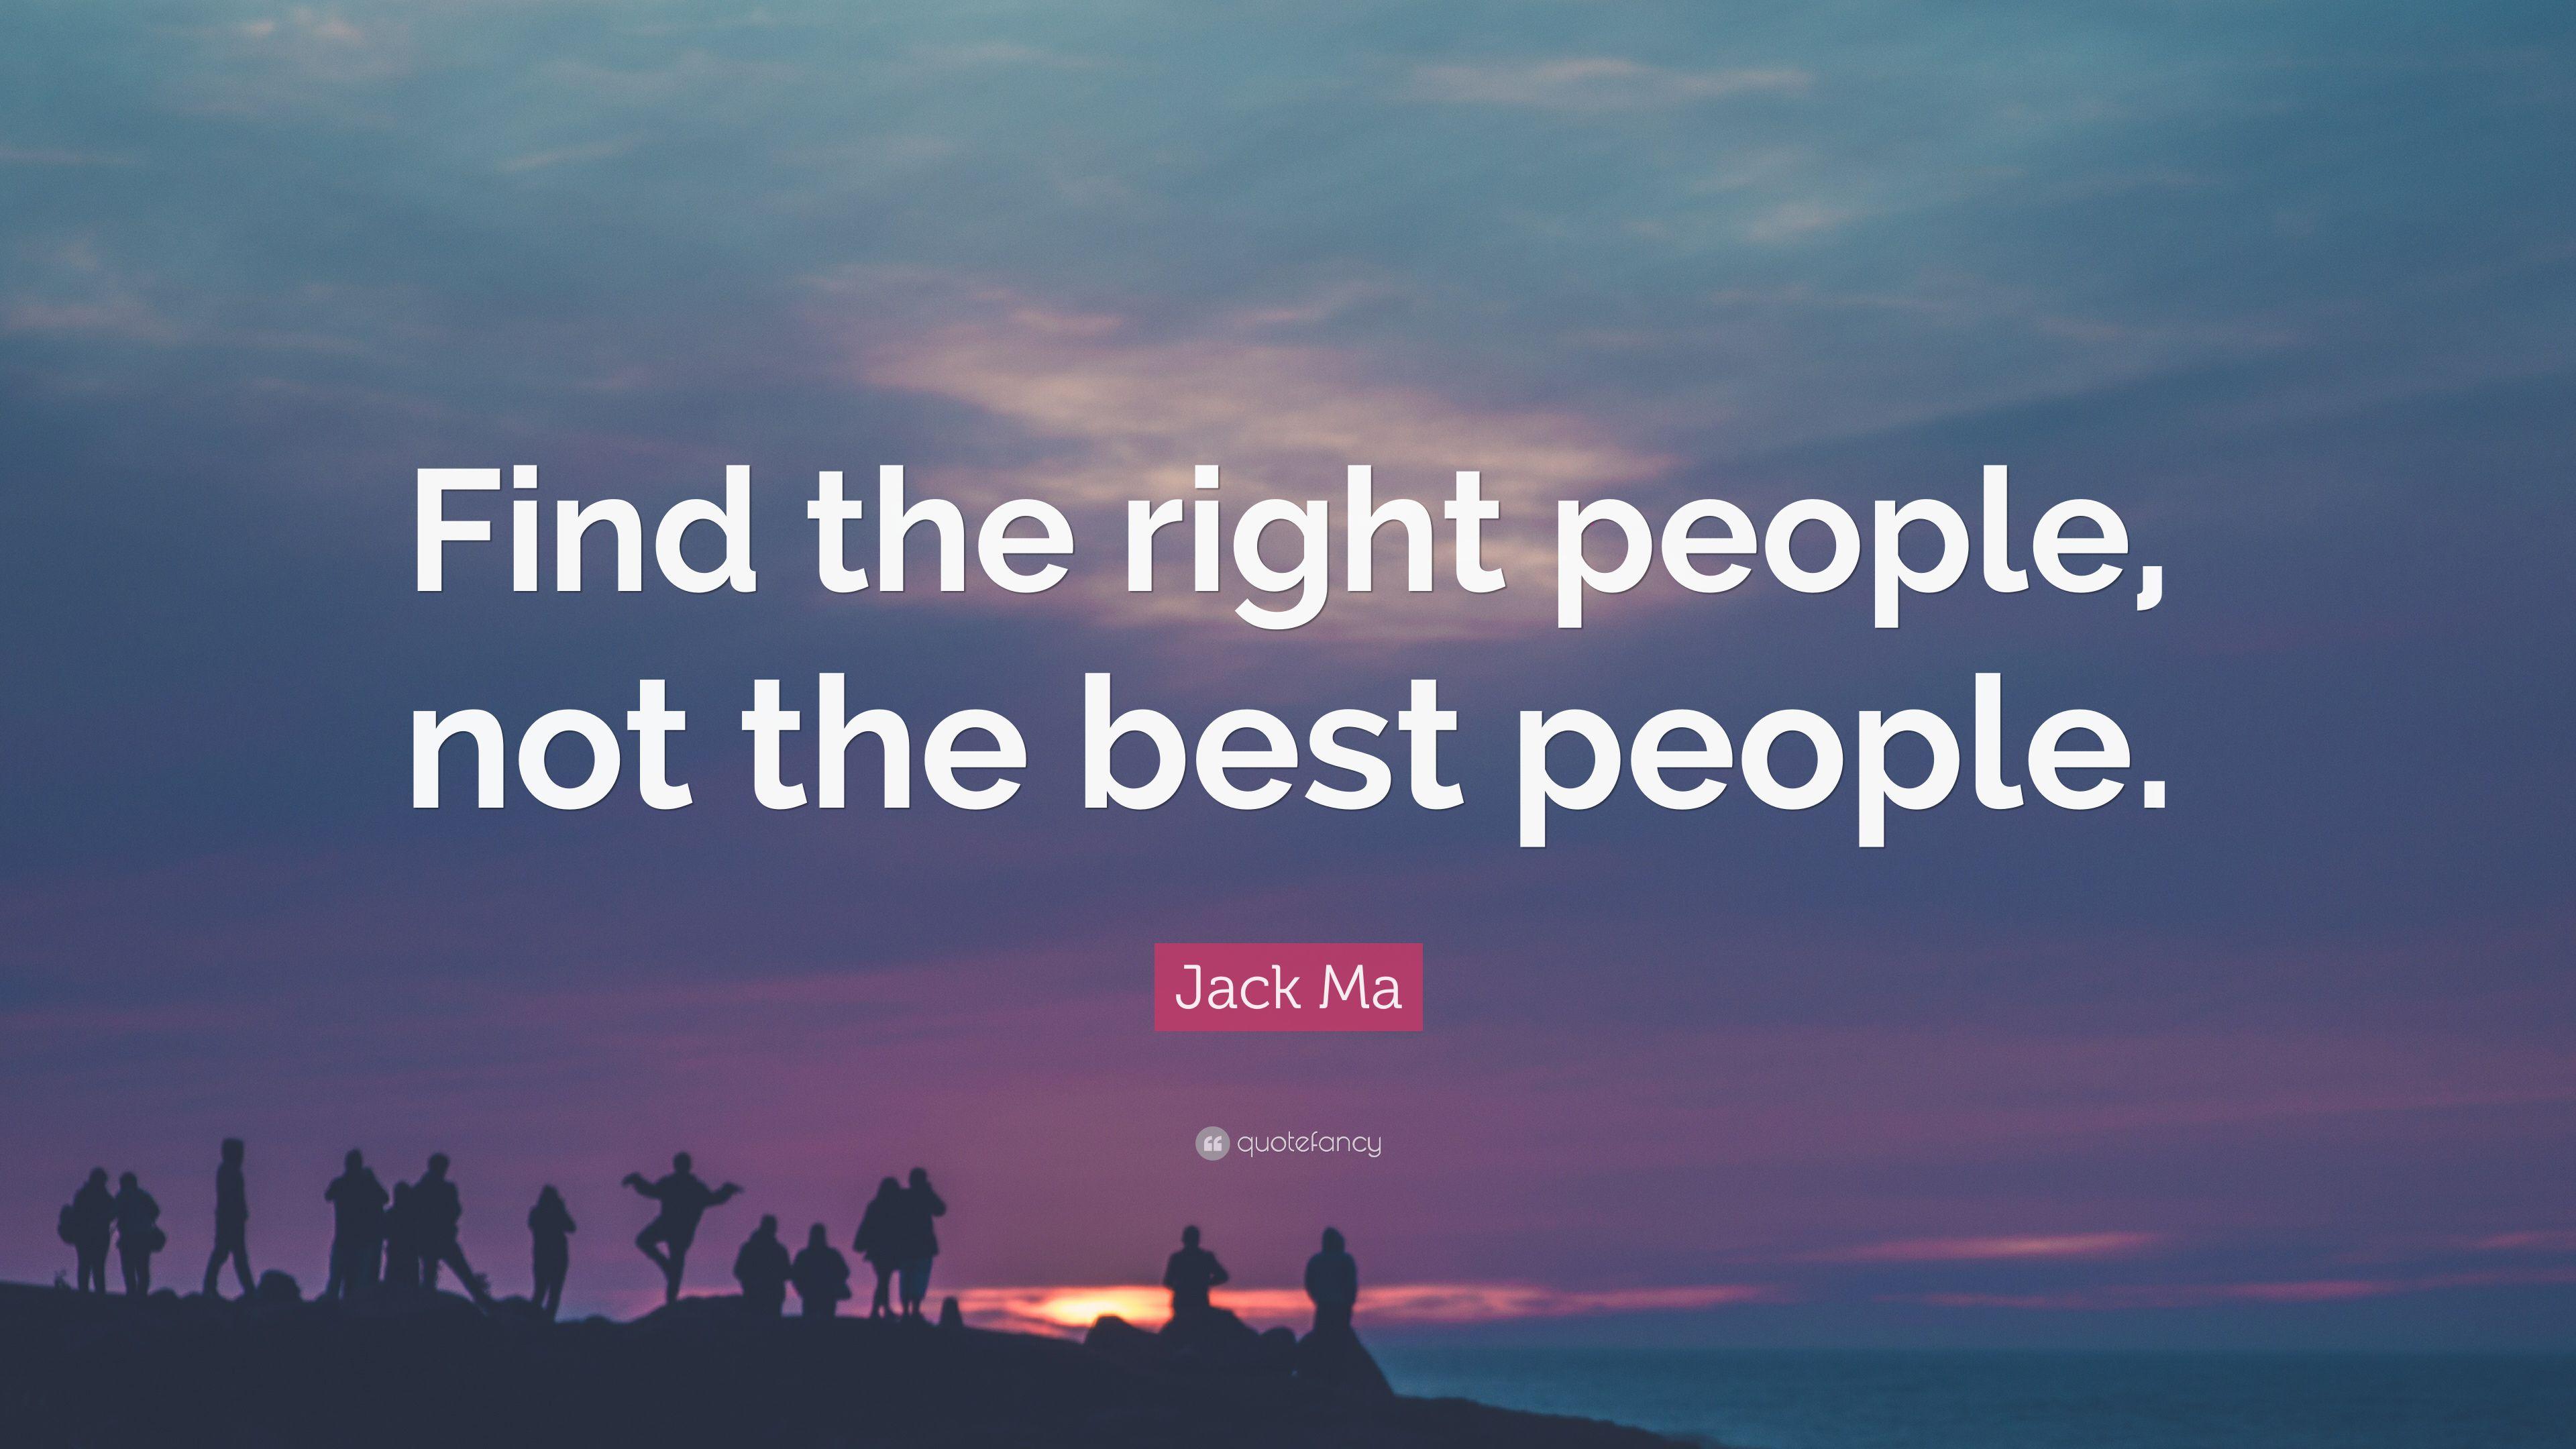 Jack Ma Quote: “Find the right people, not the best people.” 17